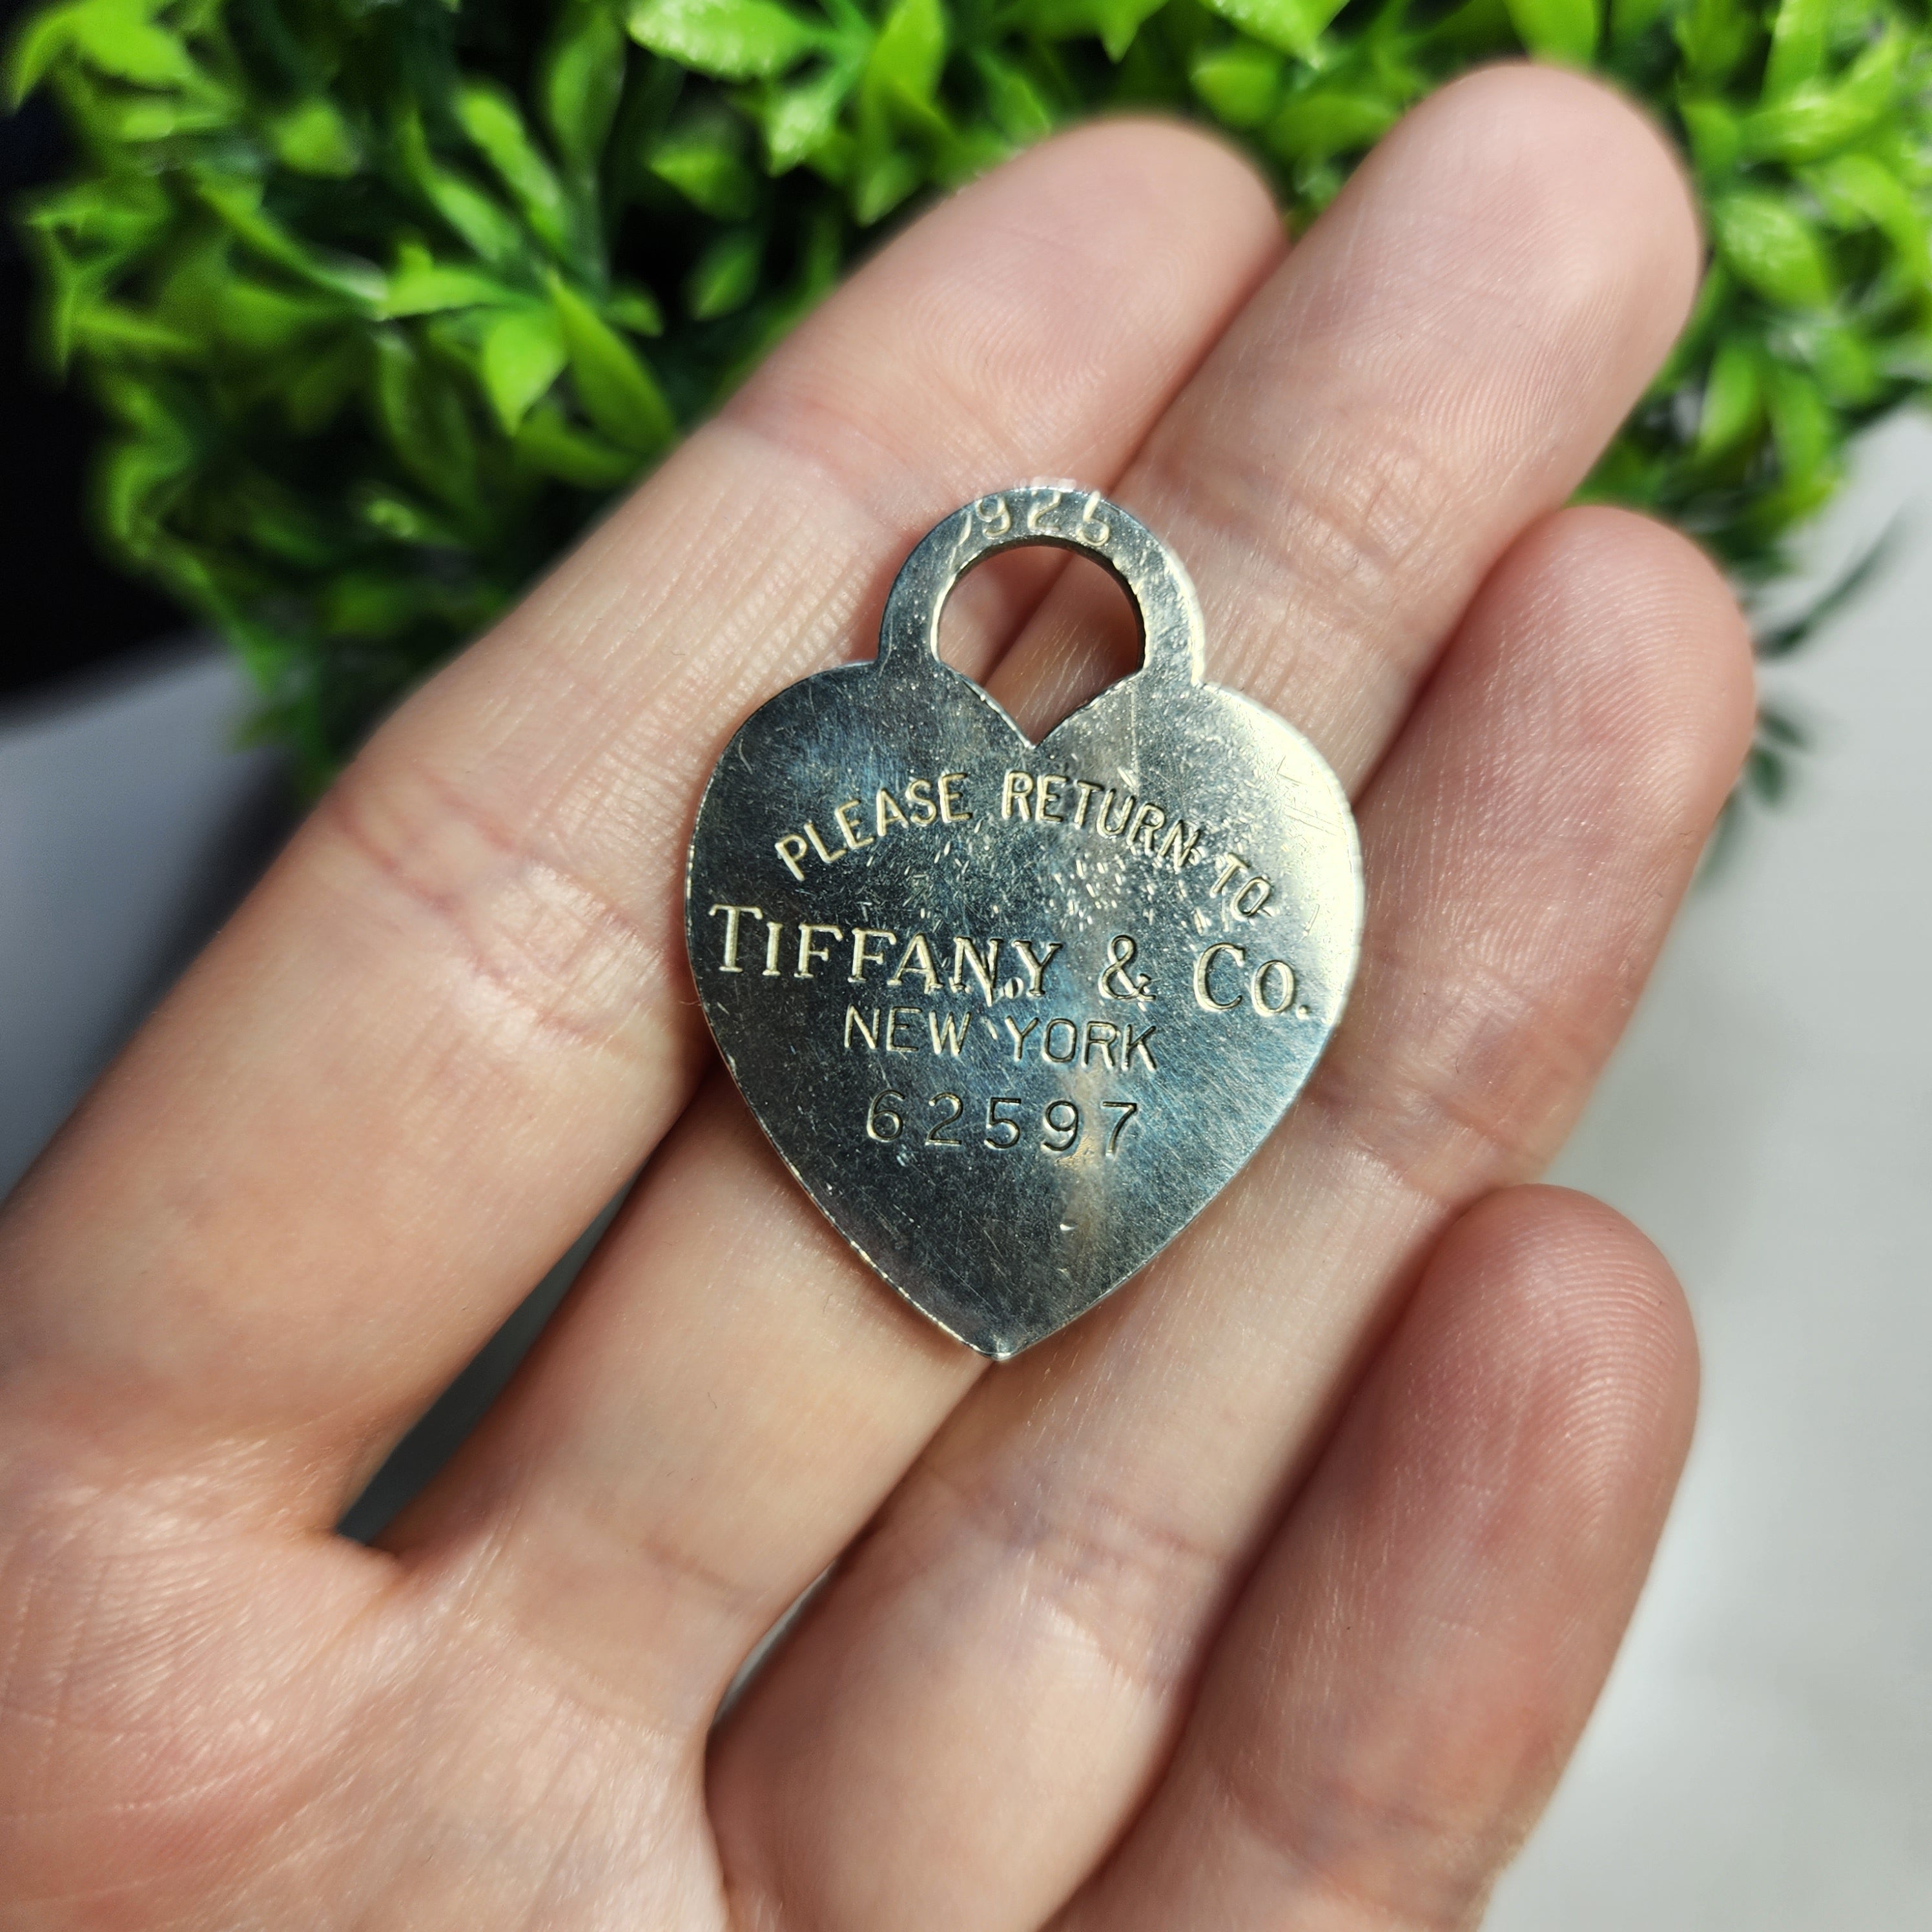 Name & Co. Tiffany style heart tag sterling silver necklace